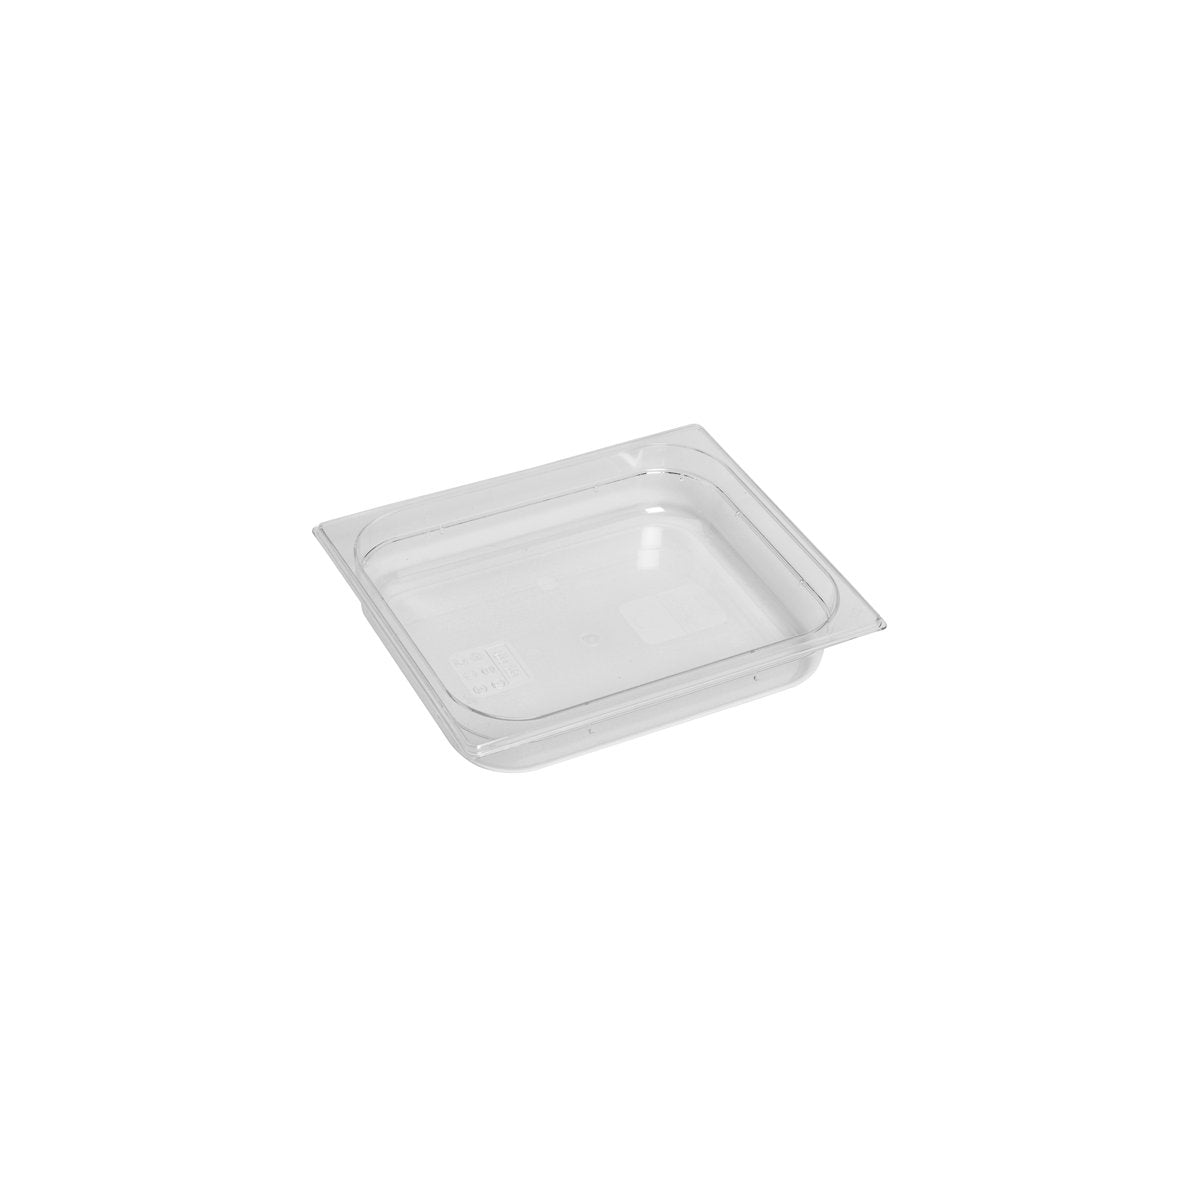 PC-12065CL Inox Macel Gastronorm Pan Polycarbonate Clear 1/2 Size 65mm Tomkin Australia Hospitality Supplies